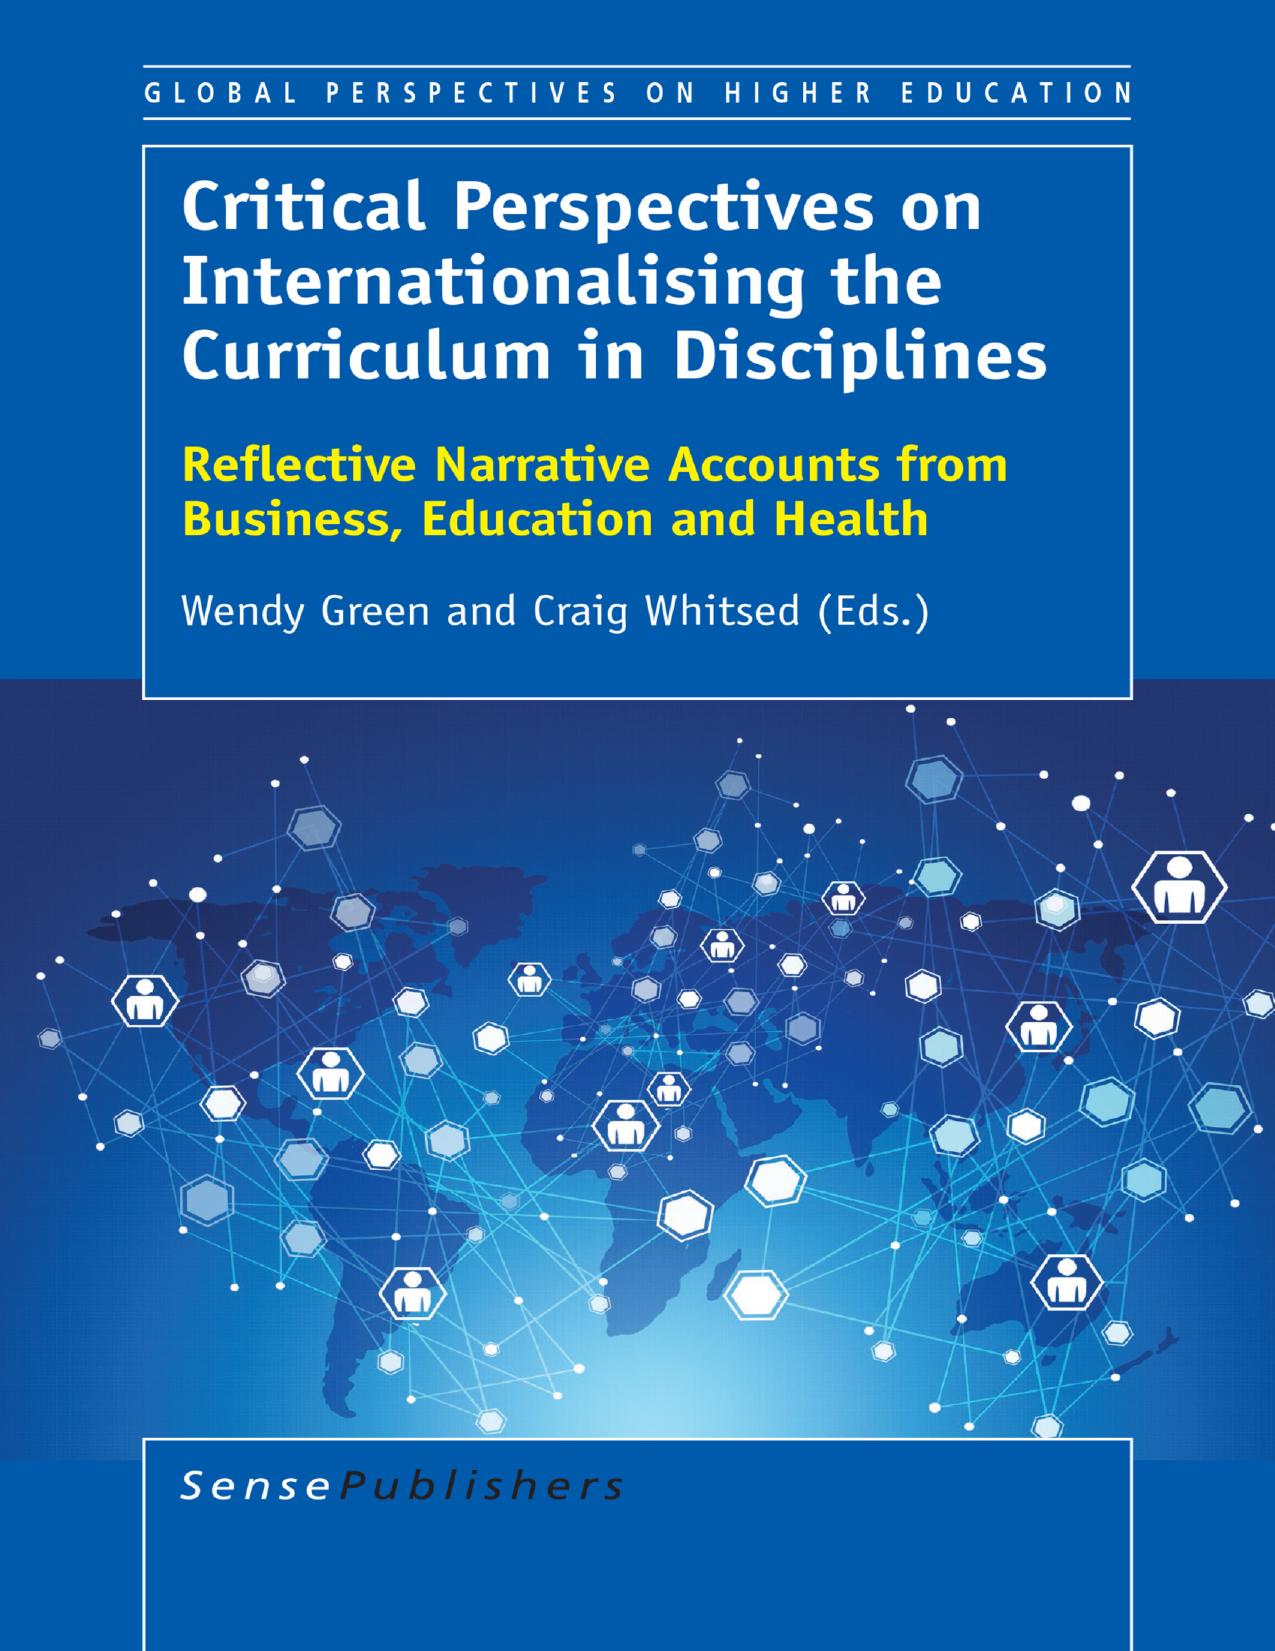 Critical Perspectives on Internationalising the Curriculum in Disciplines Reflective Narrative 2015